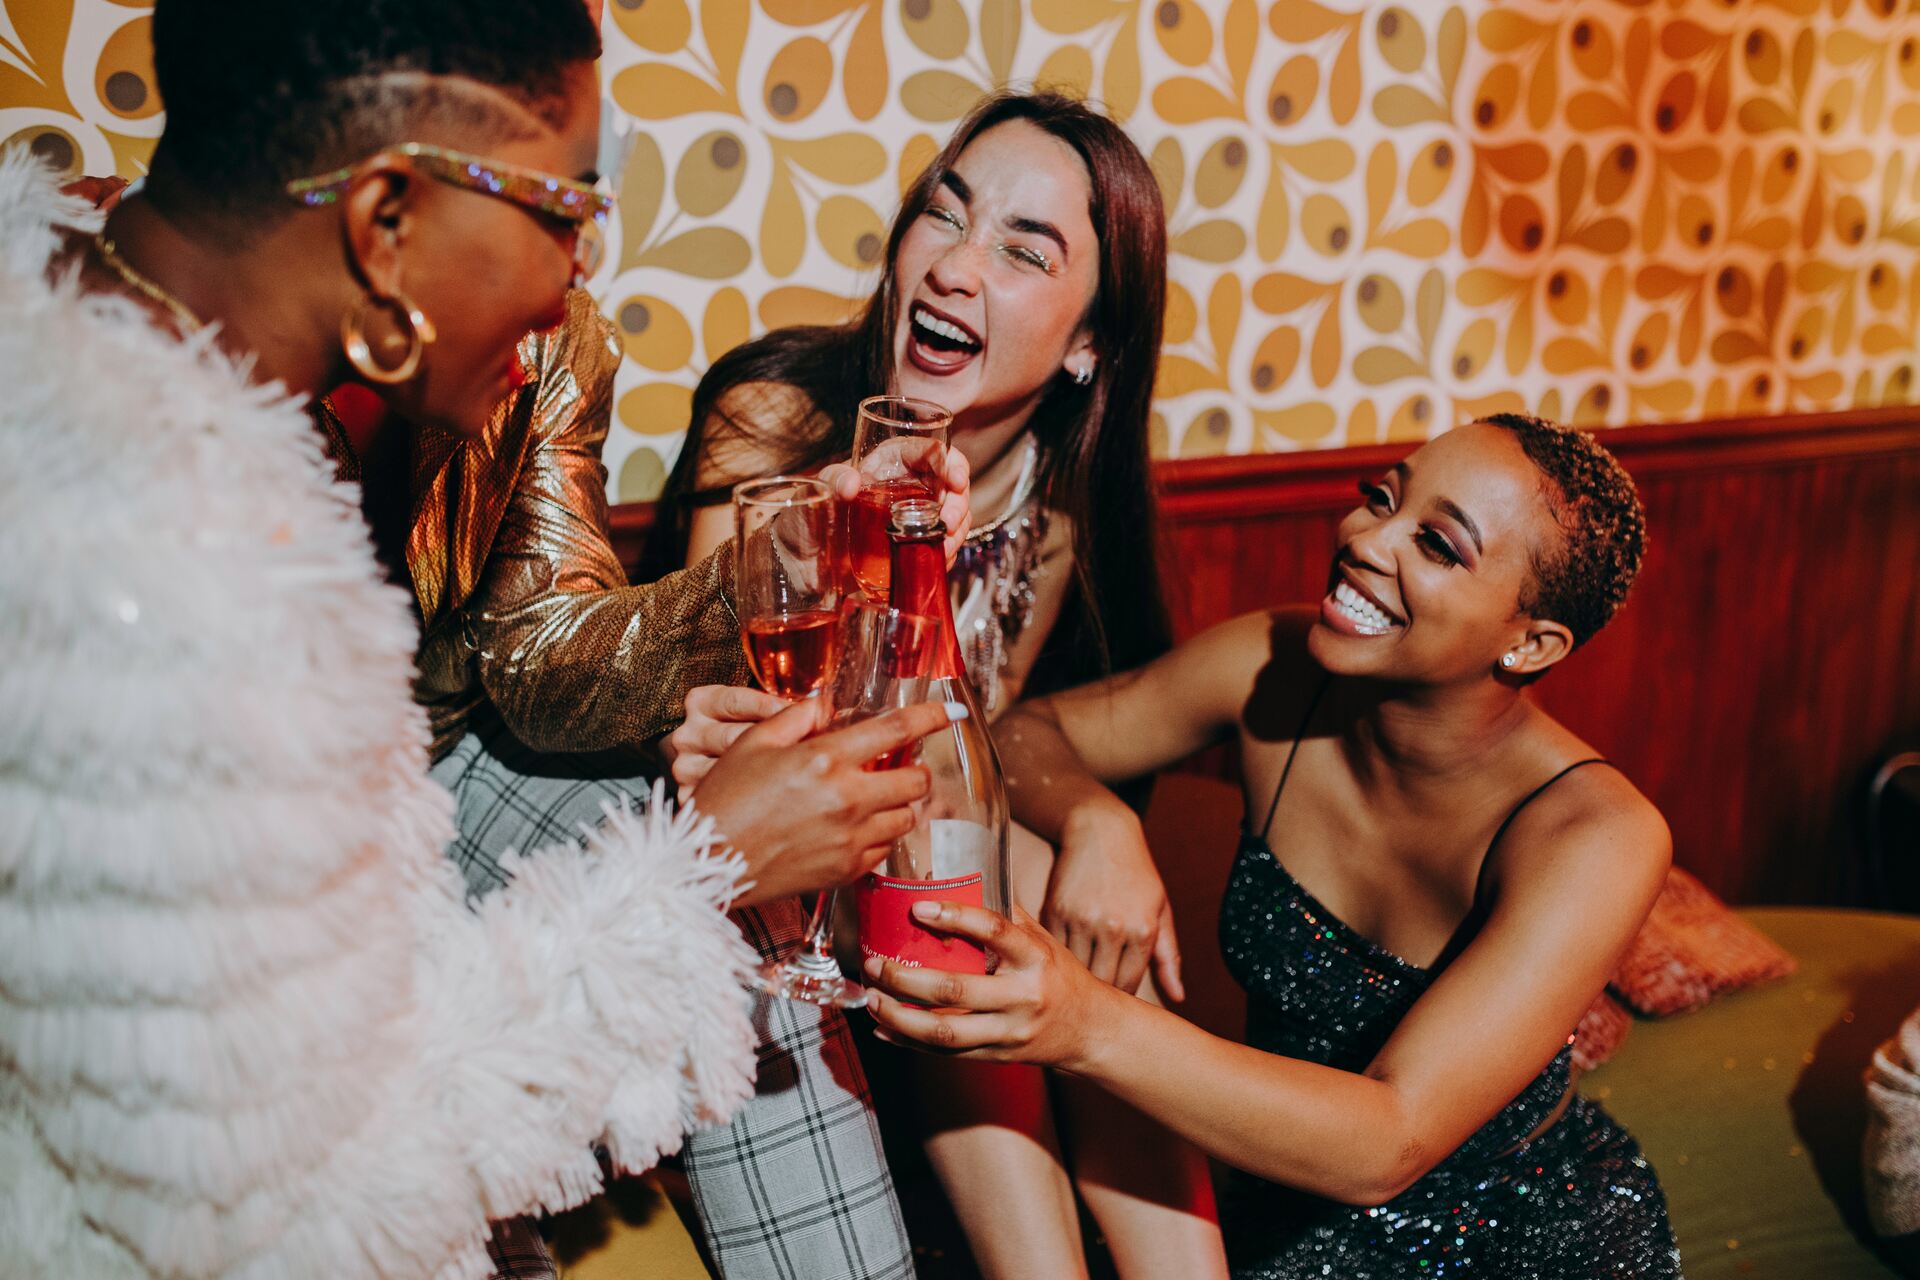 Women toasting during a party